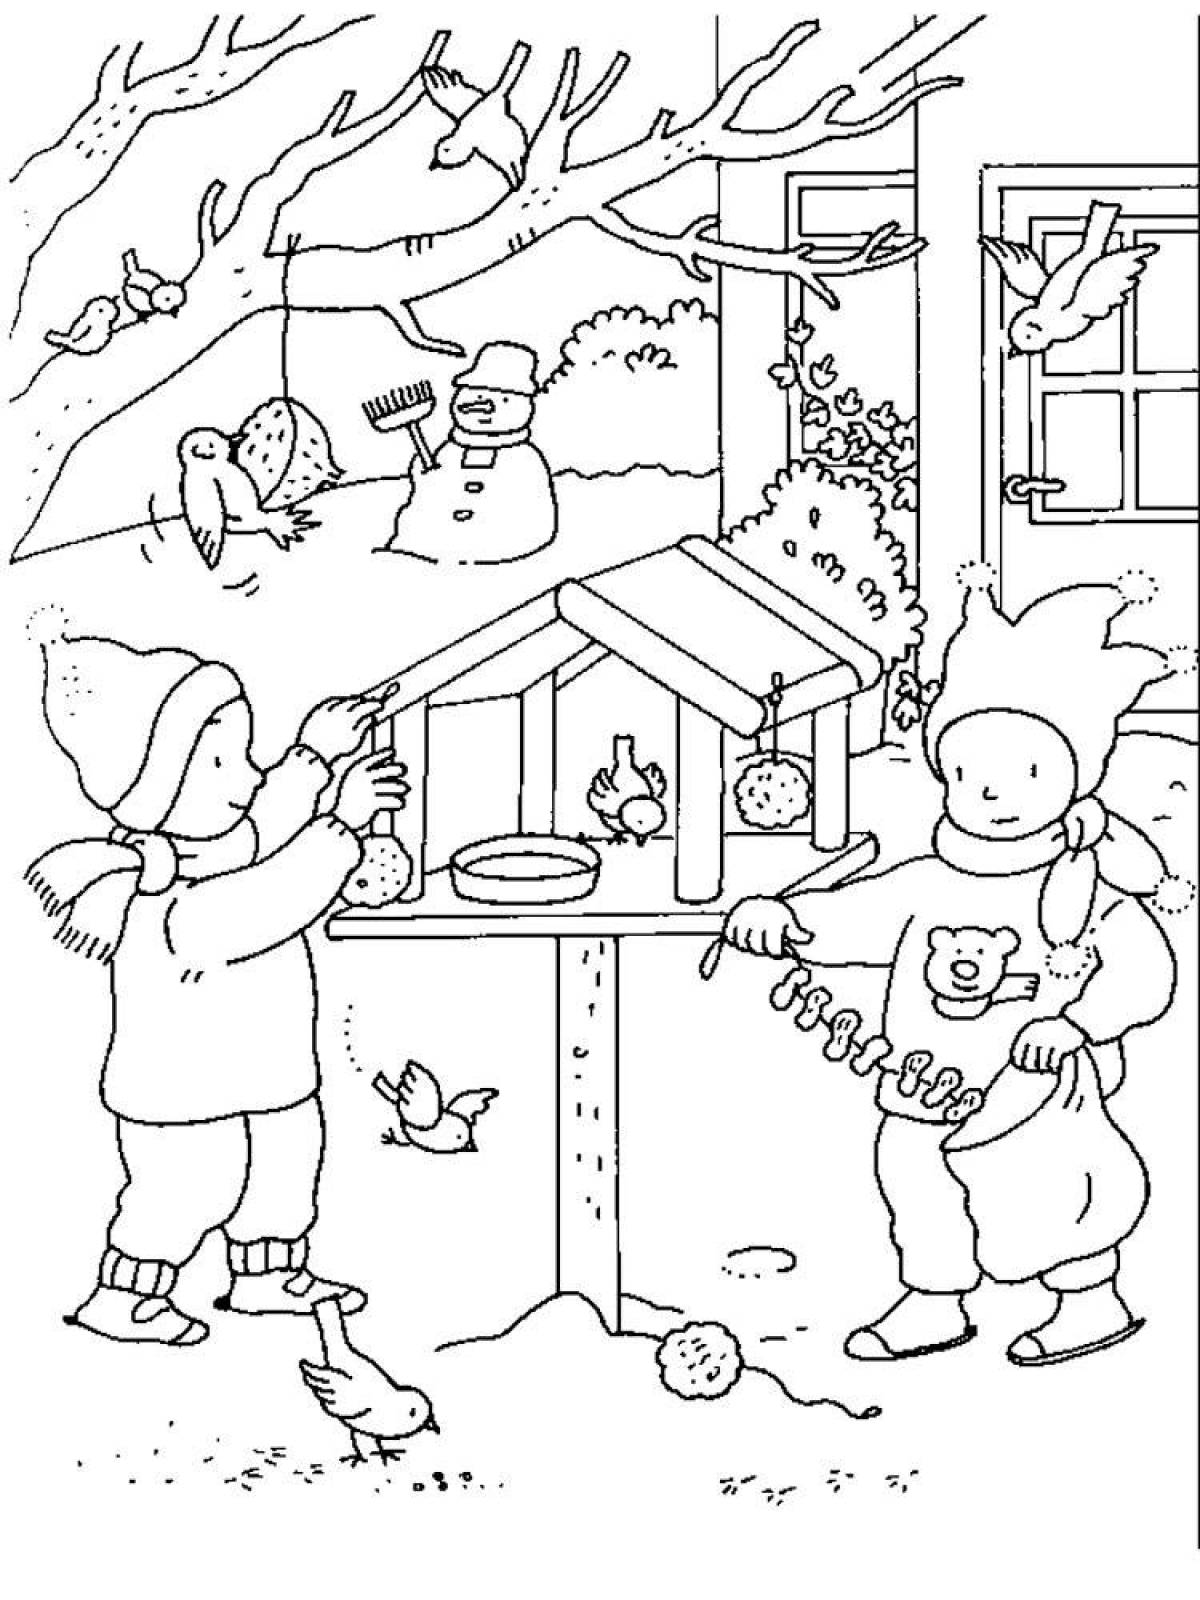 Glorious winter birds coloring page